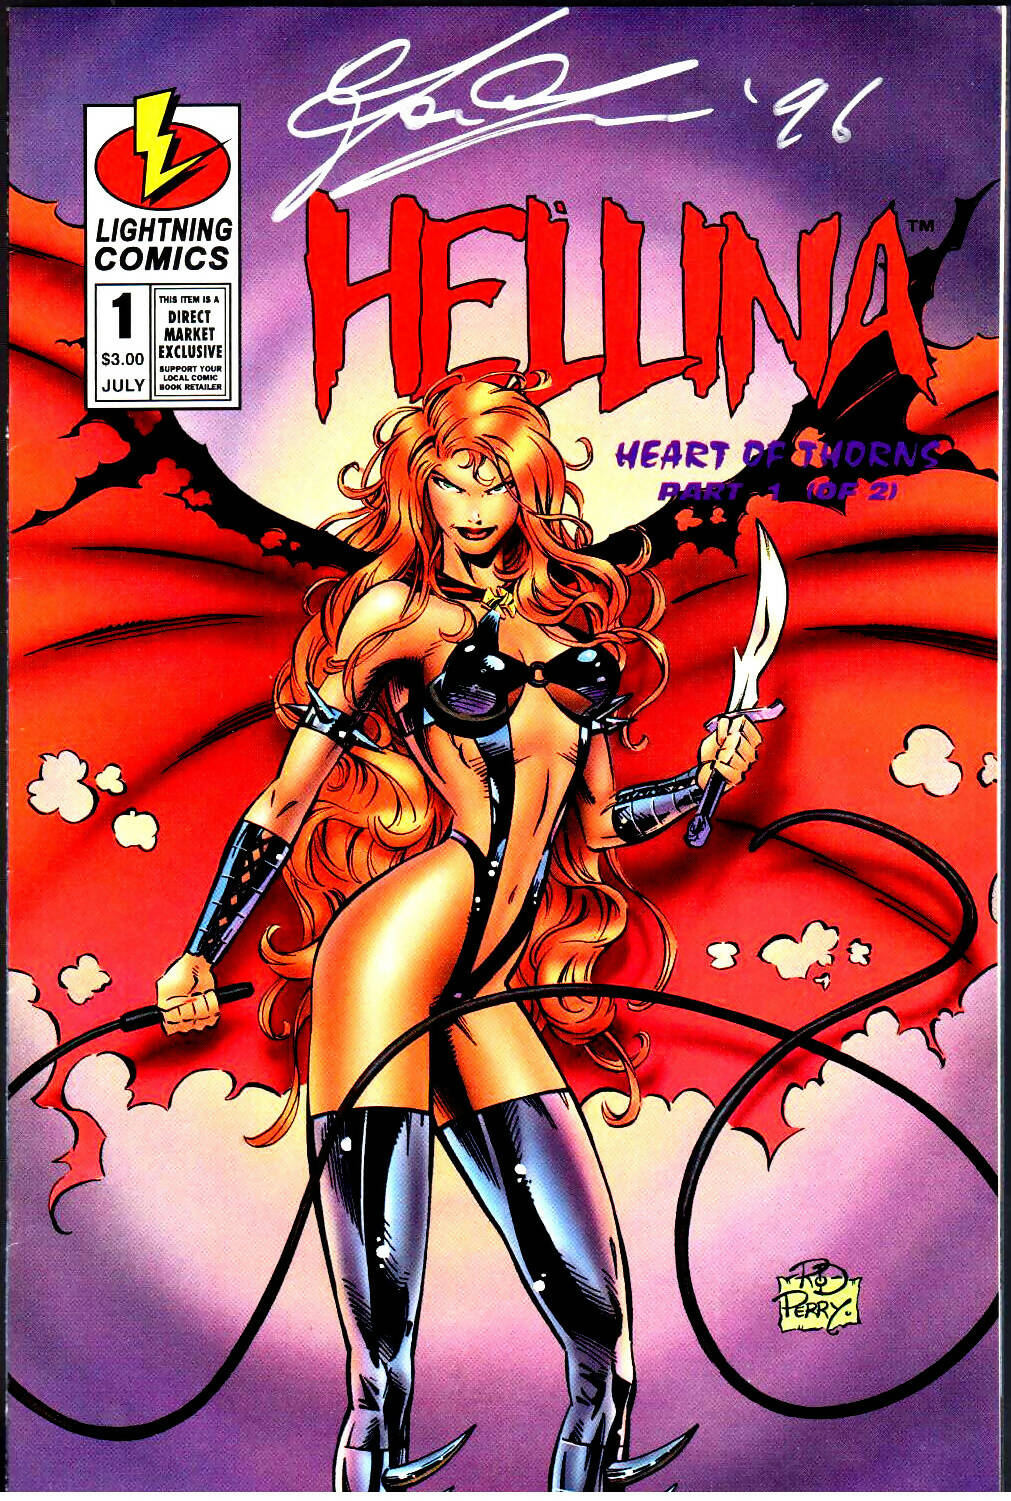 Hellina: Heart Of Thorns #1 - Autographed Edition #164/500- with COA - excellent condition